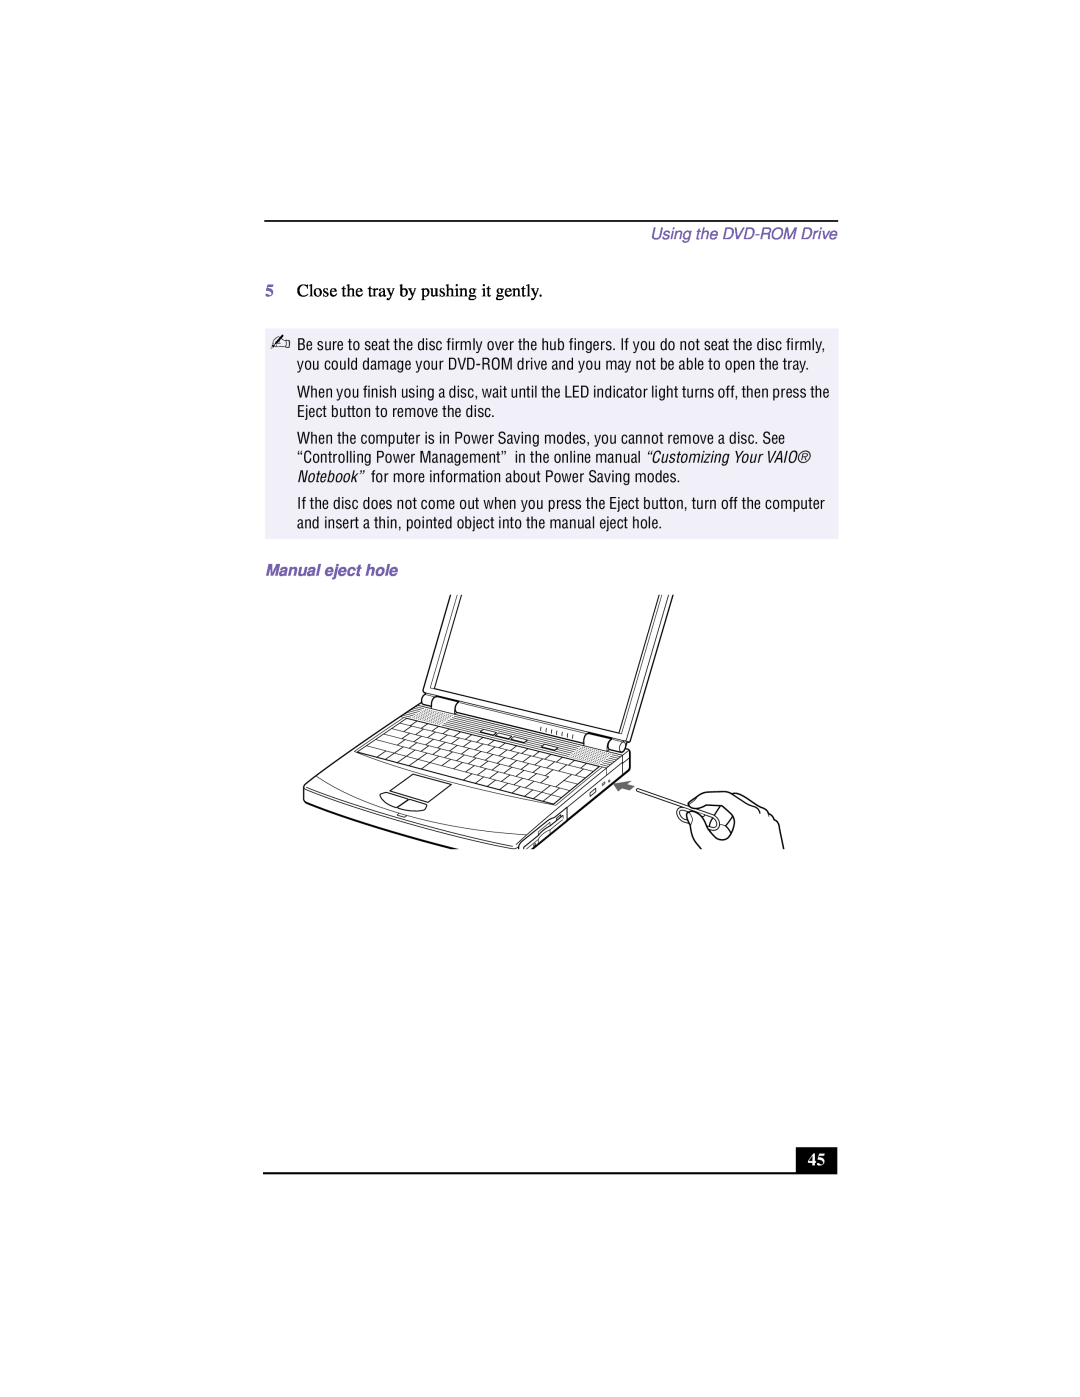 Sony PCG-F640 manual Close the tray by pushing it gently, Using the DVD-ROM Drive, Manual eject hole 